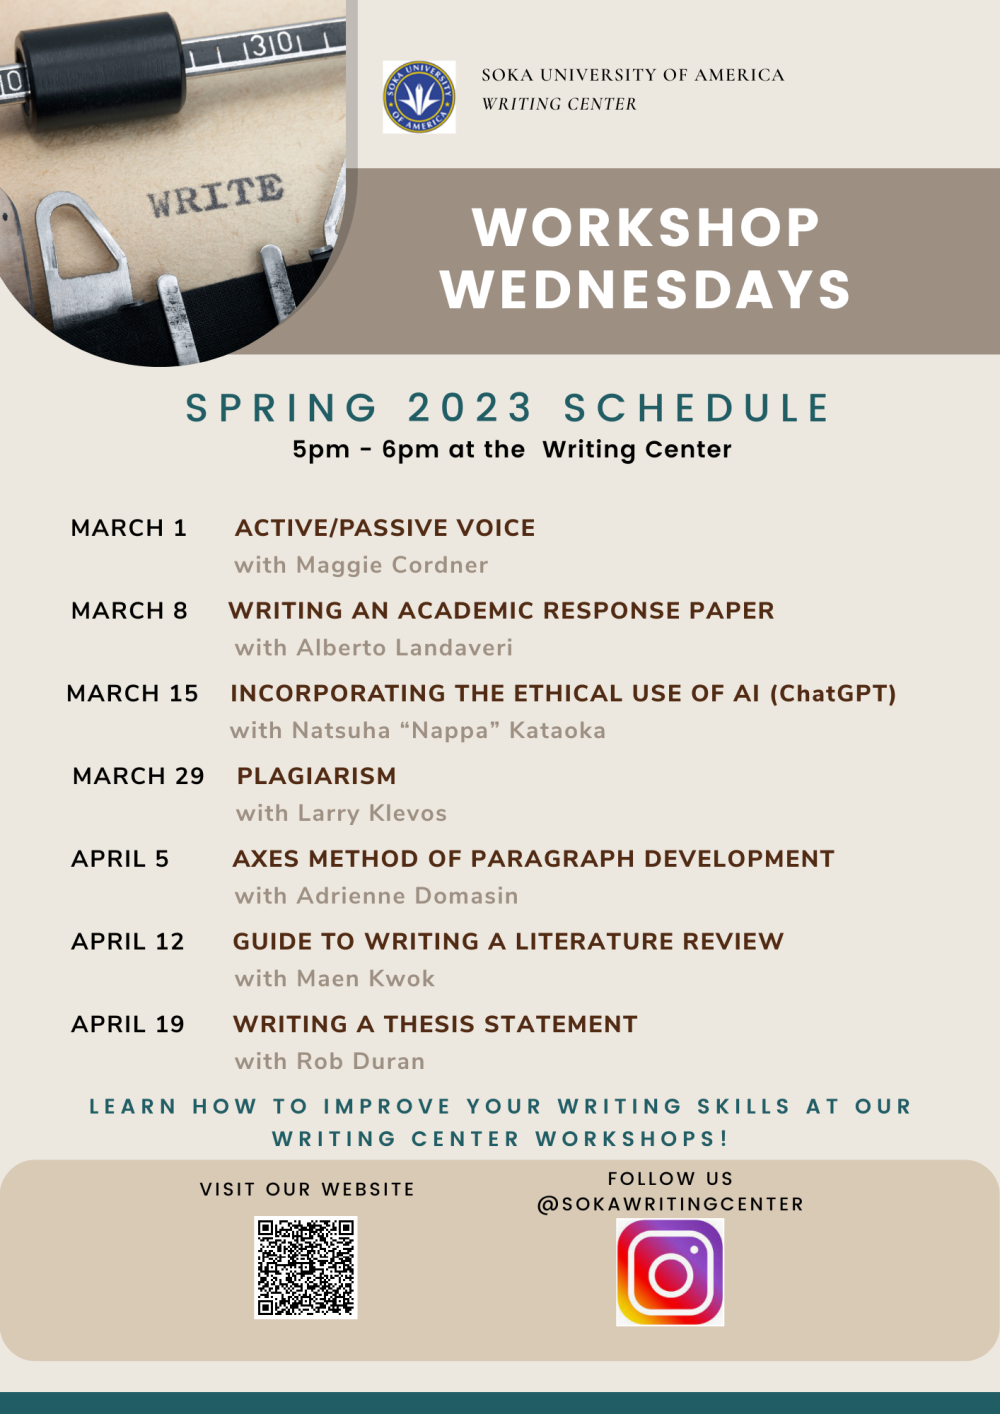 Spring 2023 Workshop Dates and Topics